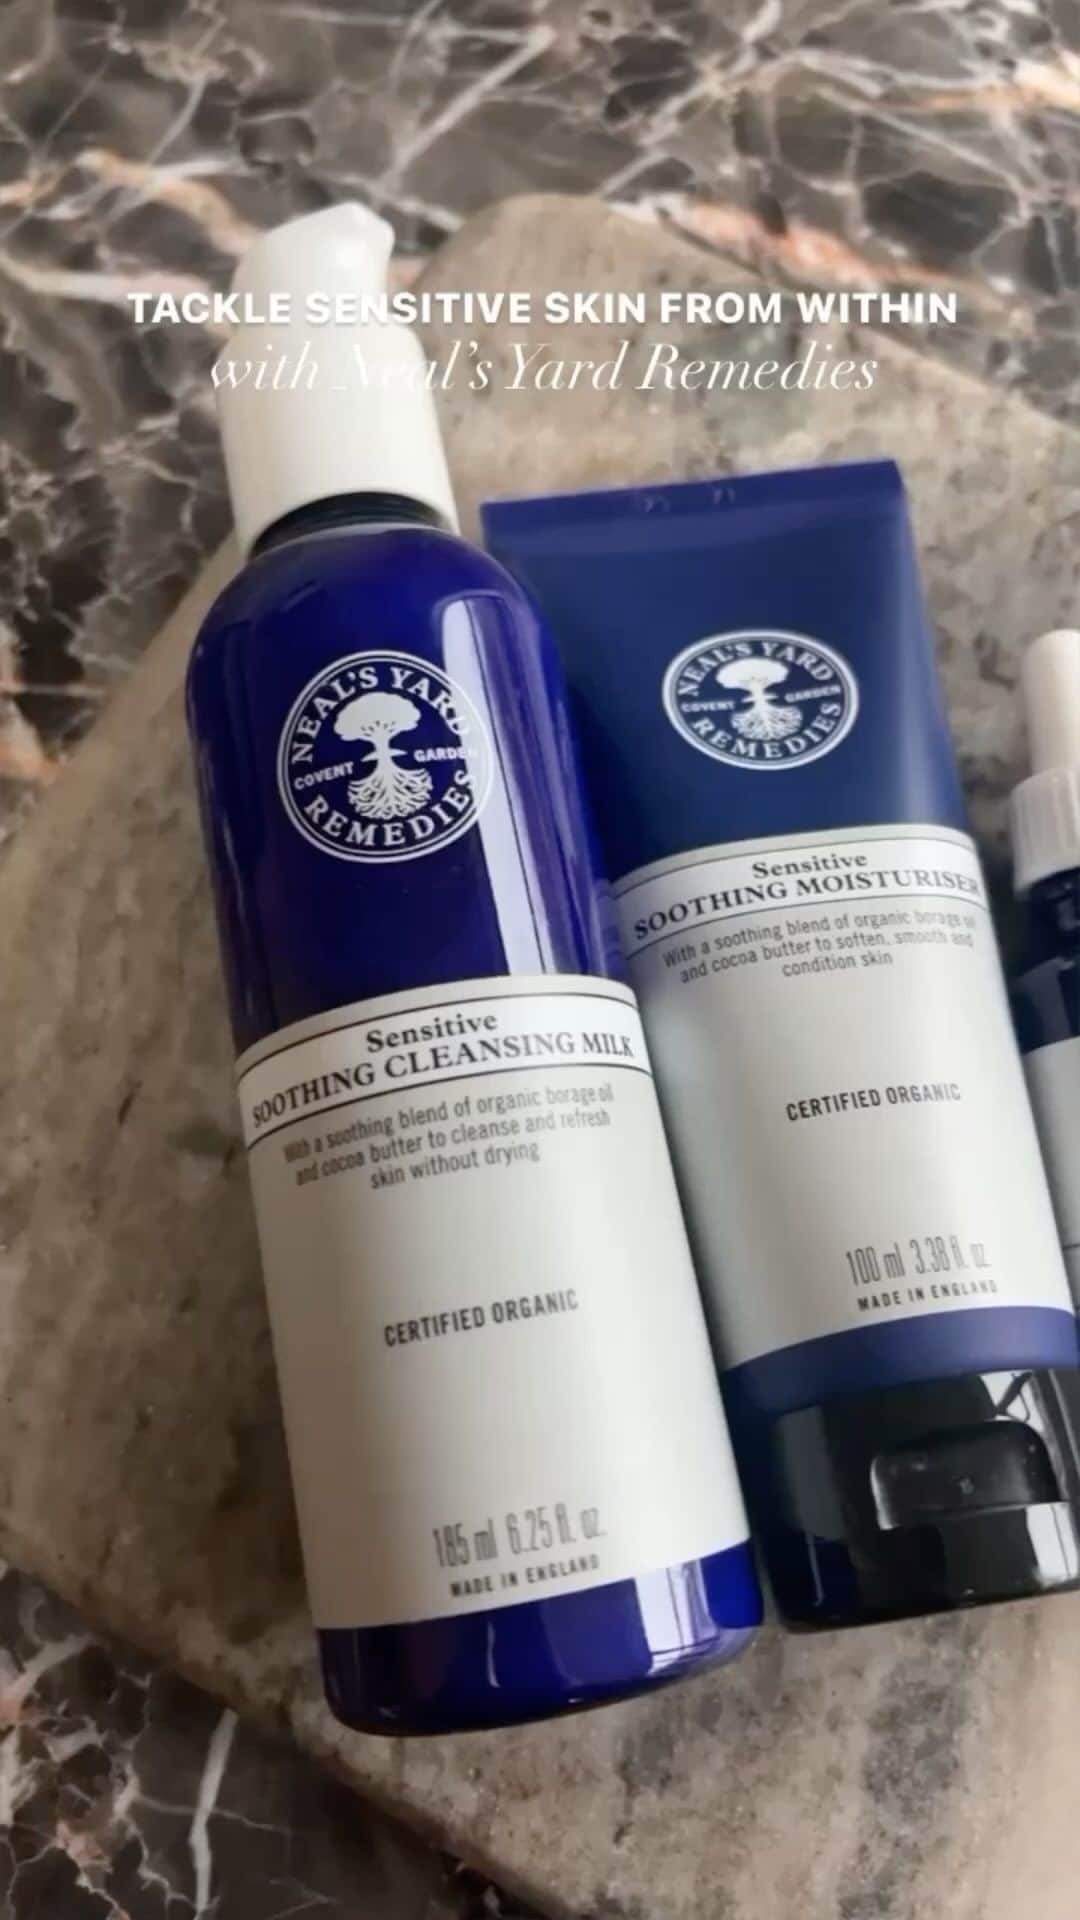 Neal's Yard Remediesのインスタグラム：「Proudly introducing my sensitive skin edit for @nealsyeardremedies. I’ve designed this edit to naturally target sensitive skin from the inside and out, combining a skincare routine and a nutrition protocol to nourish, comfort, and replenish sensitive skin.    To target sensitive skin from the outside I’ve chosen my favourite products from their natural and organic sensitive skin range, including the certified organic Restore + Smooth Serum, which is clinically proven to reduce skin reactiveness after 28 days of use. It contains naturally fermented oat extract and hyaluronic acid, and it works wonders.    I’ve also created a sensitive skin, anti-inflammatory meal plan which harnesses the healing powers of plants, including 3 nourishing meals plus the Neal’s Yard Remedies Dandelion & Burdock inner-health herbal blend, an effective way to drink your skincare and take your wellbeing regime to another level.    Head over to the nealsyardremedies.com for the full edit. #AD   #nealsyardremedies #gutskinaxis #insideoutbeauty」